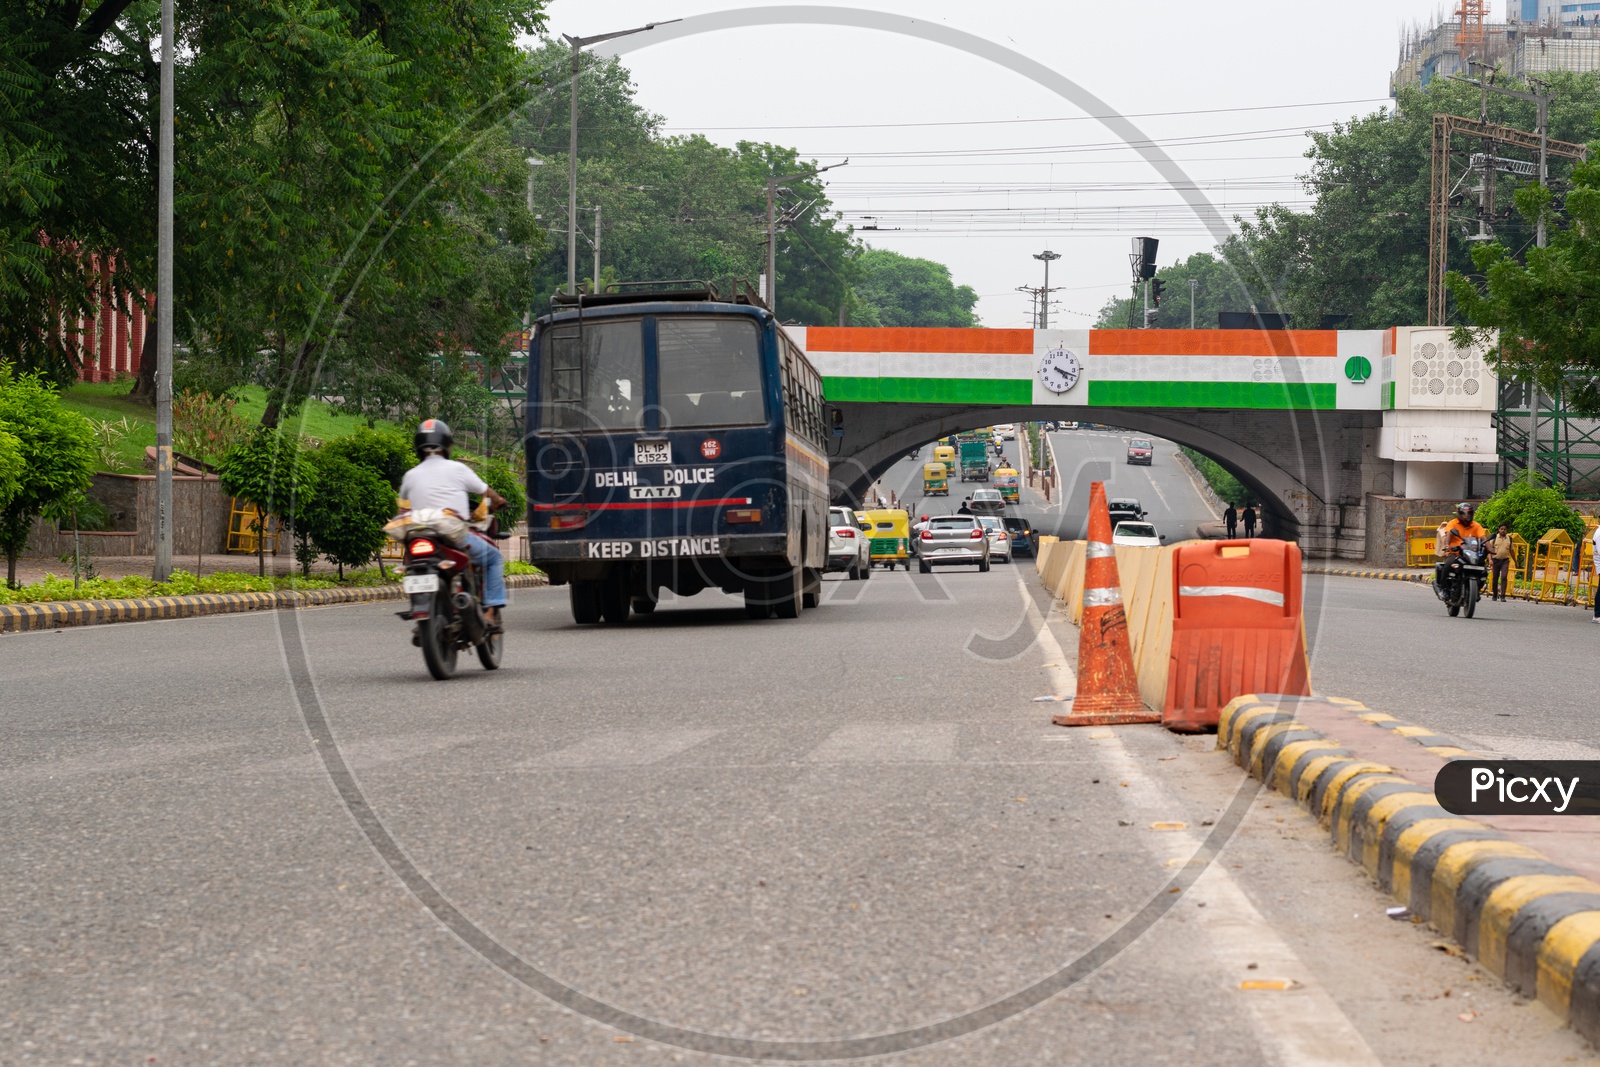 Tricolour (The National Flag of India) painted on a railway bridge above Minto Road and Delhi Police bus